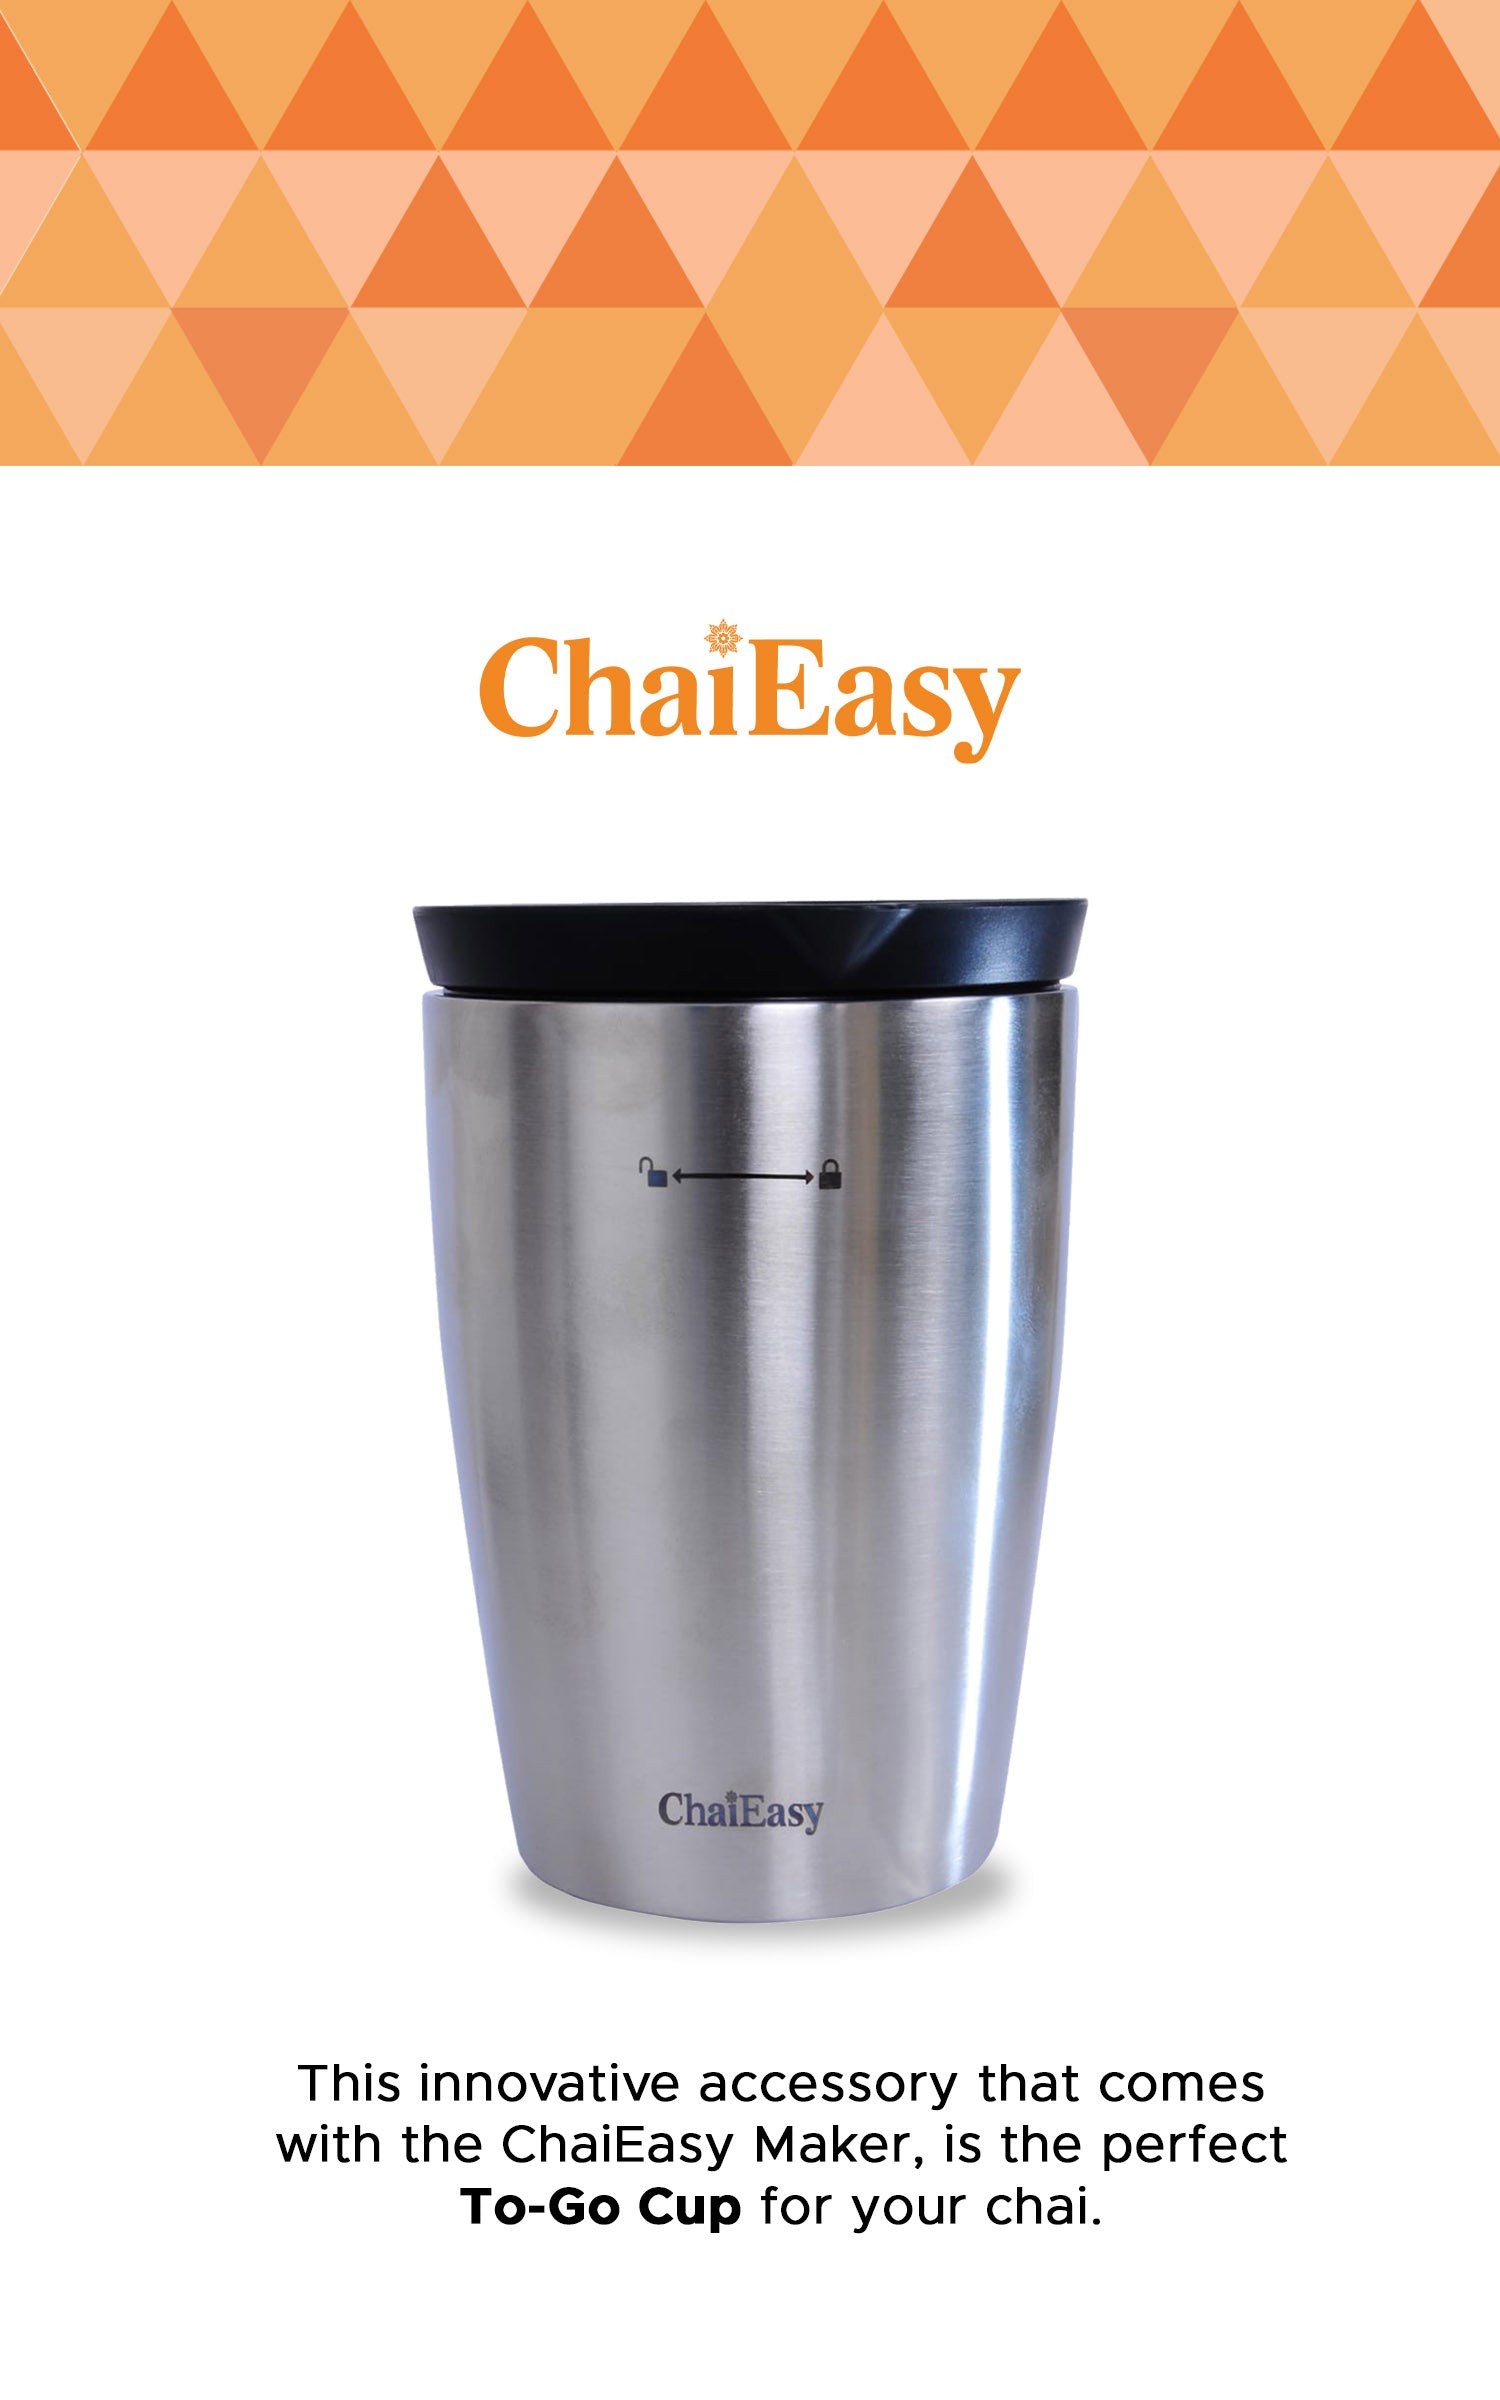  ChaiEasy Automatic Chai & Tea Maker  Tea Brewer 120V- Perfect  Electric Indian Chai Tea Brewing Machine (Black) with 10 Pods in 4 unique  blends – Ginger, Cardamom, Masala & Classic